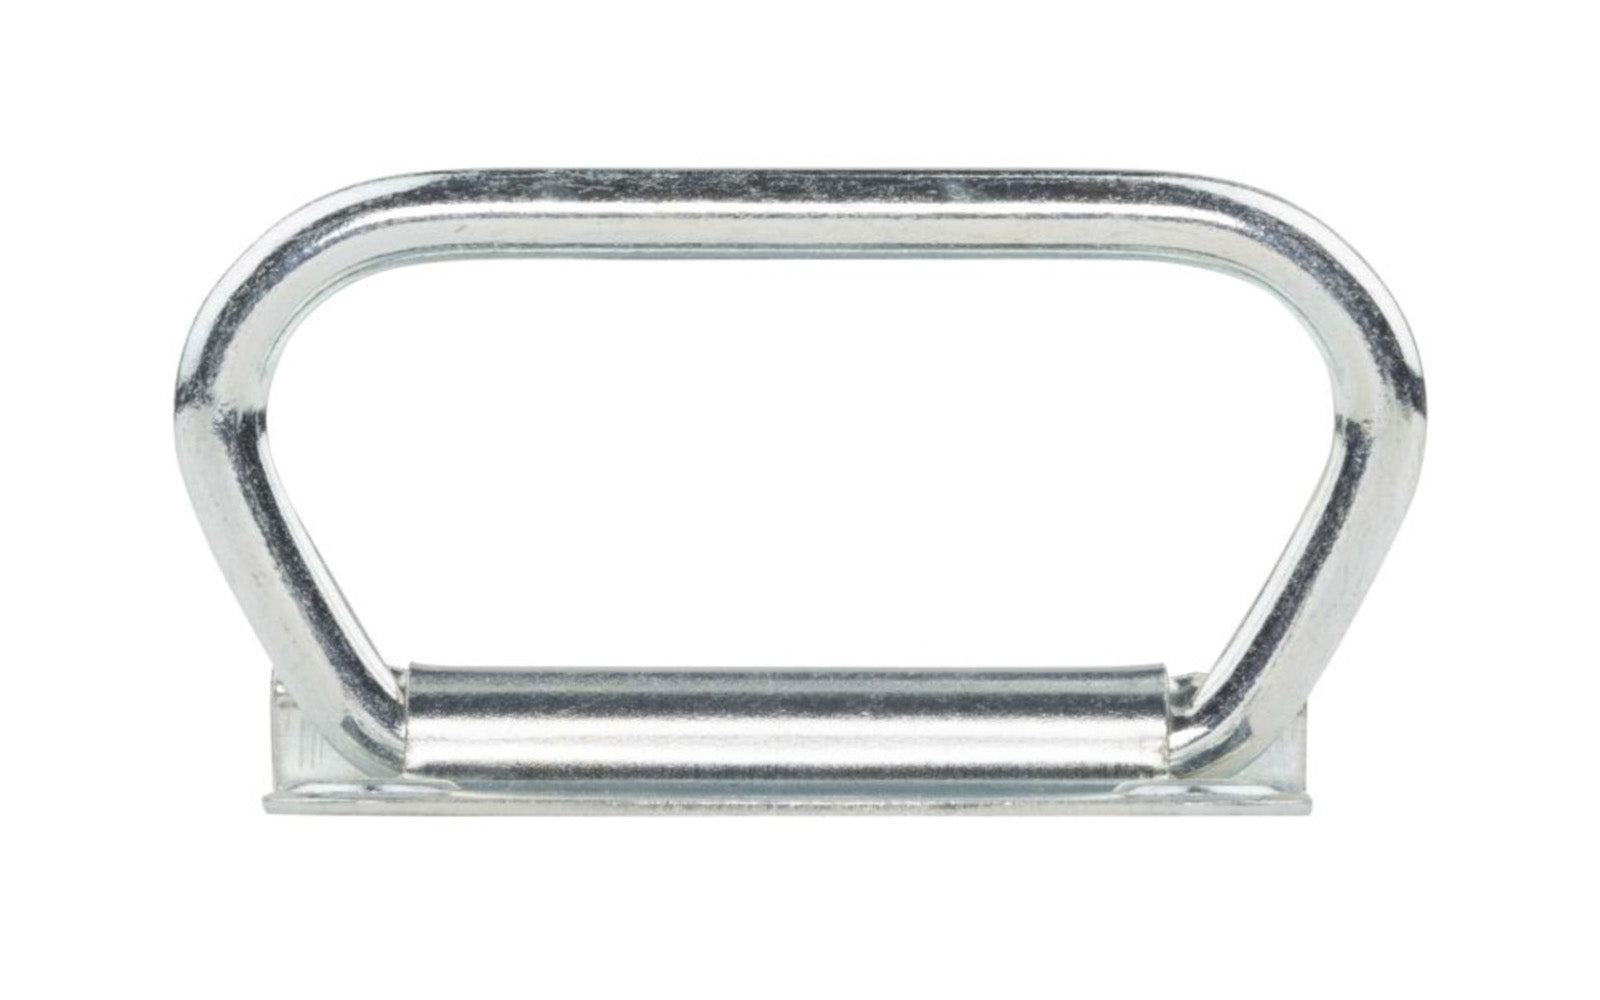 This 2-3/4" chest handle is made of cold rolled steel. Designed for smaller chests & boxes. Zinc-plated steel. Sold as one handle in pack. National Hardware Model No. N203-760. 038613203761. 2-3/4" Zinc Plated Steel Chest Handle